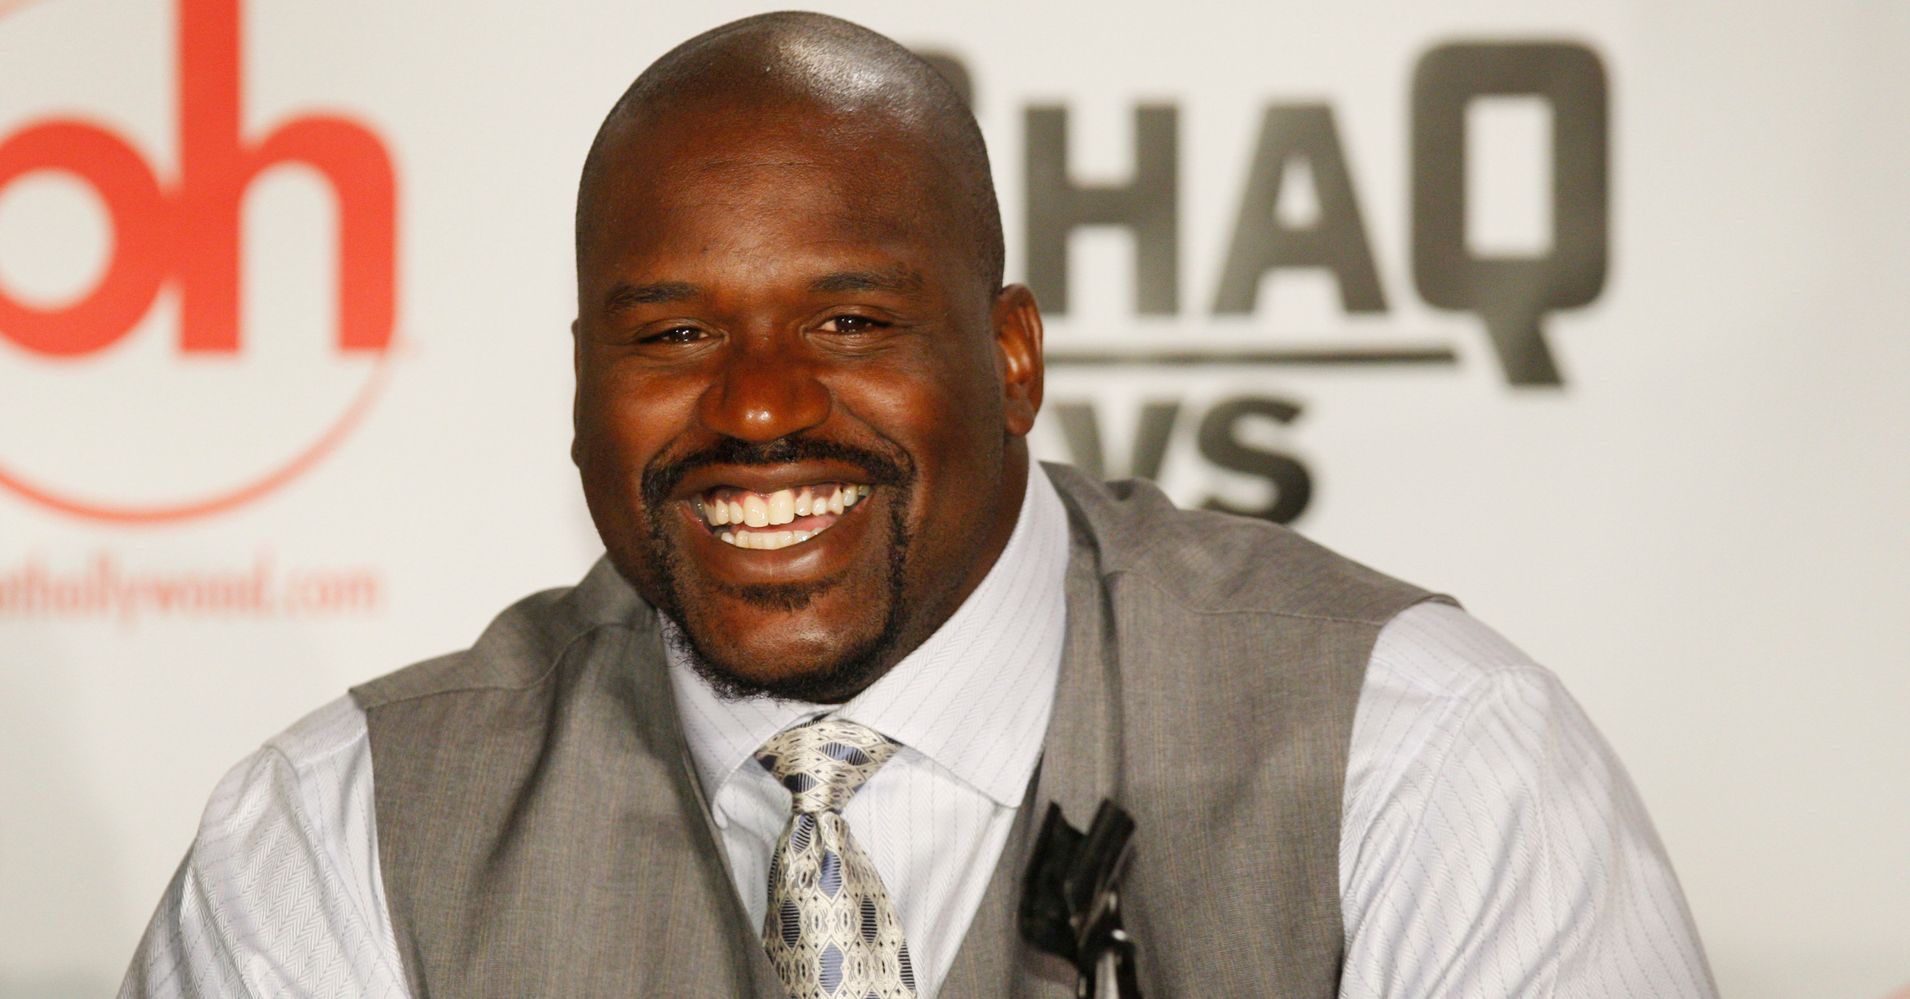 Shaq Says He's Planning To Run For Sheriff | HuffPost1910 x 999